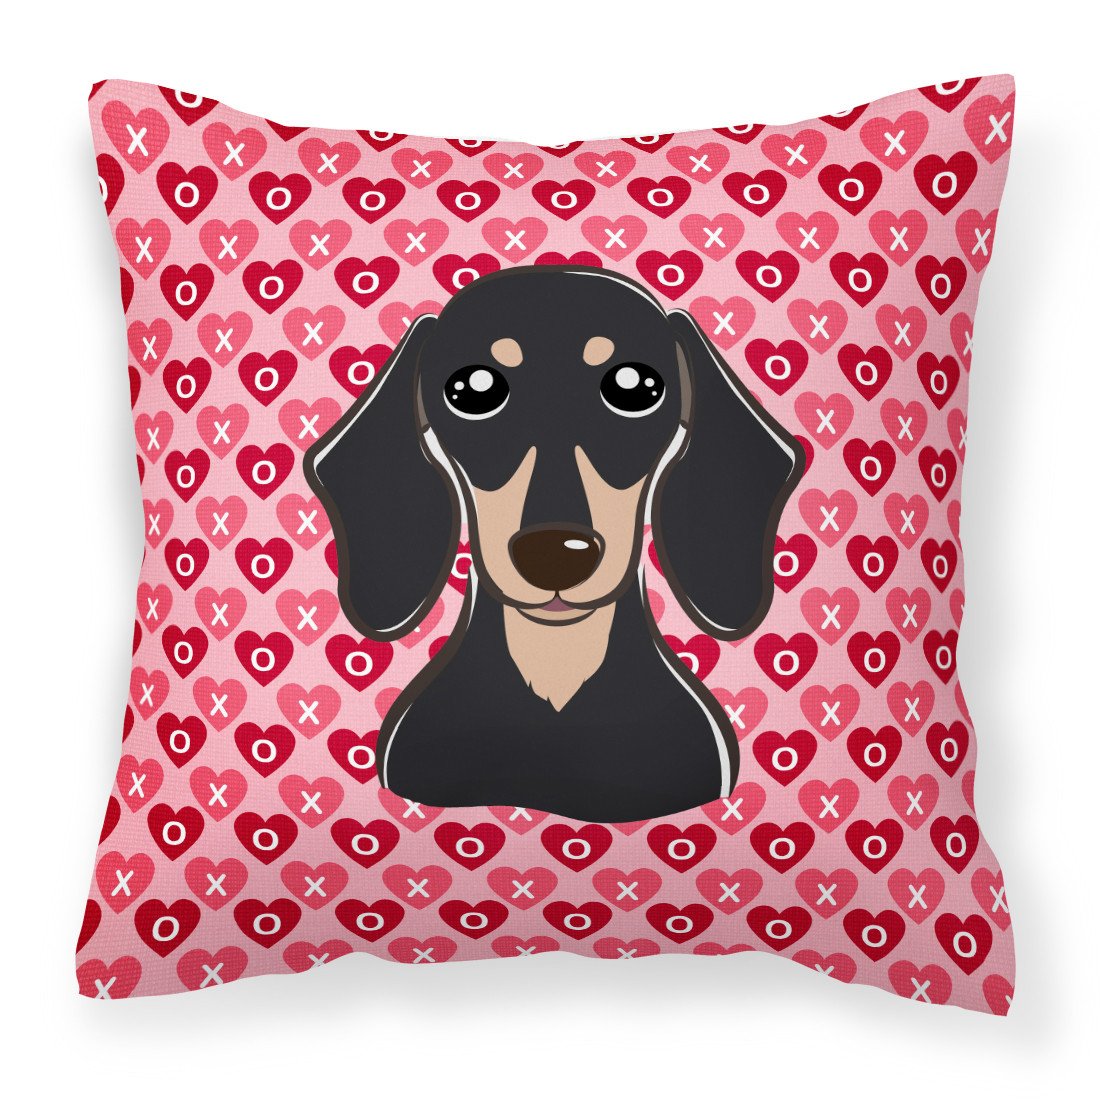 Smooth Black and Tan Dachshund Hearts Fabric Decorative Pillow BB5285PW1818 by Caroline's Treasures